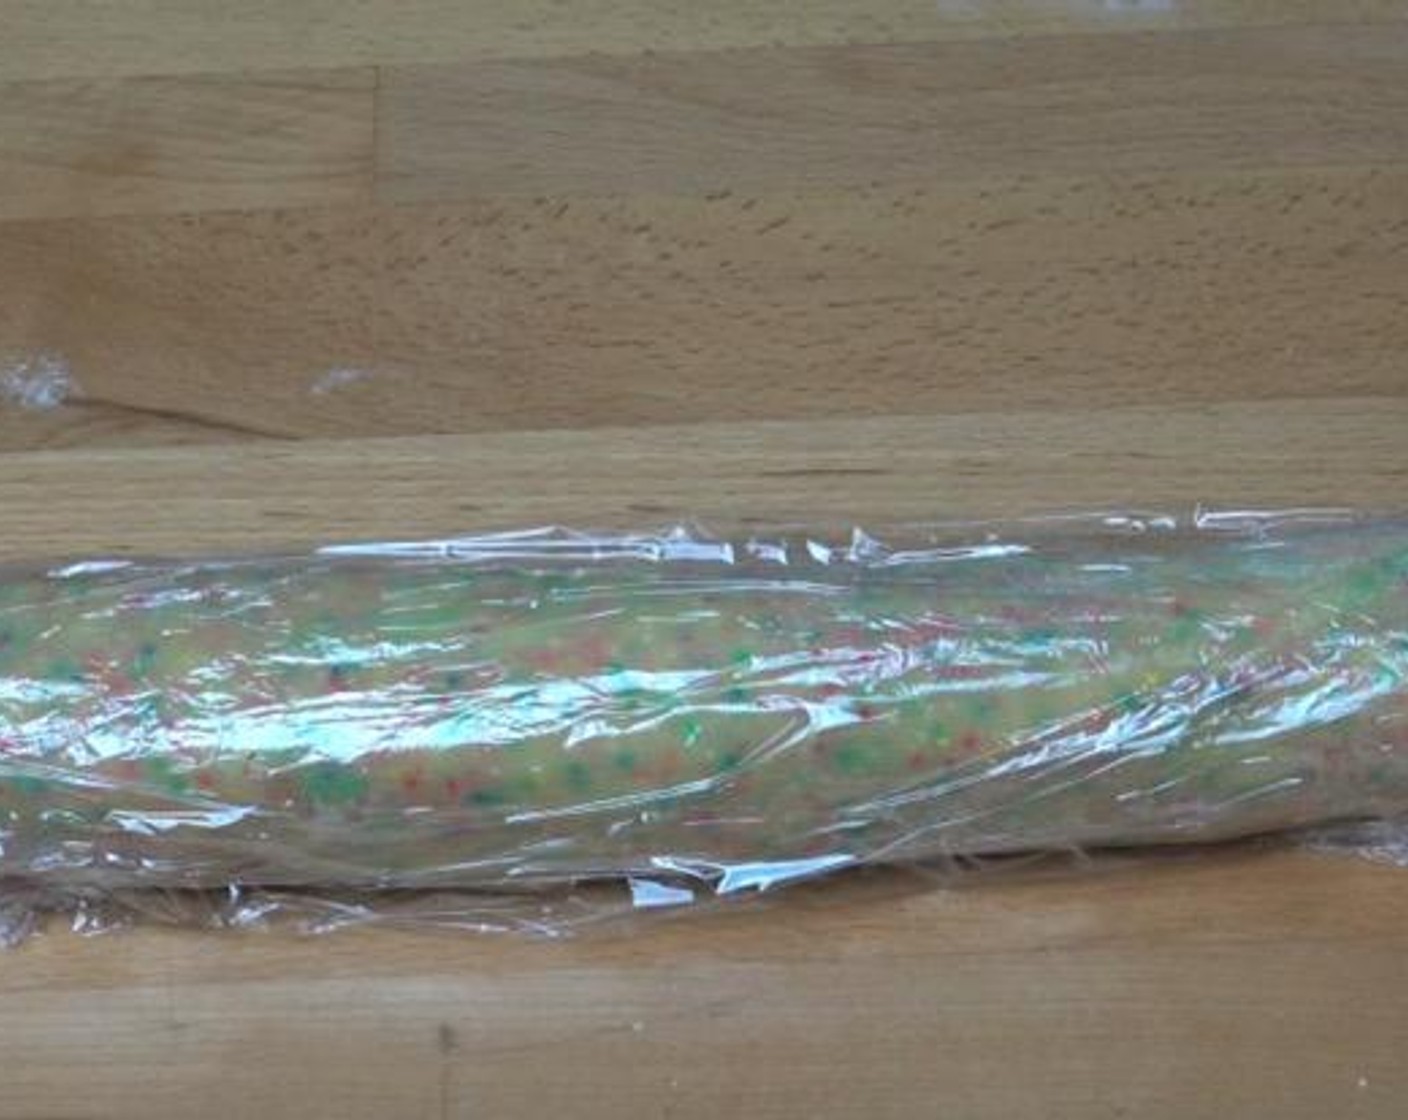 step 4 Transfer the dough to a lightly floured surface. Shape it into a 30-centimeter log and wrap the log in plastic wrap. Place in the fridge for 1-2 hours to firm up.